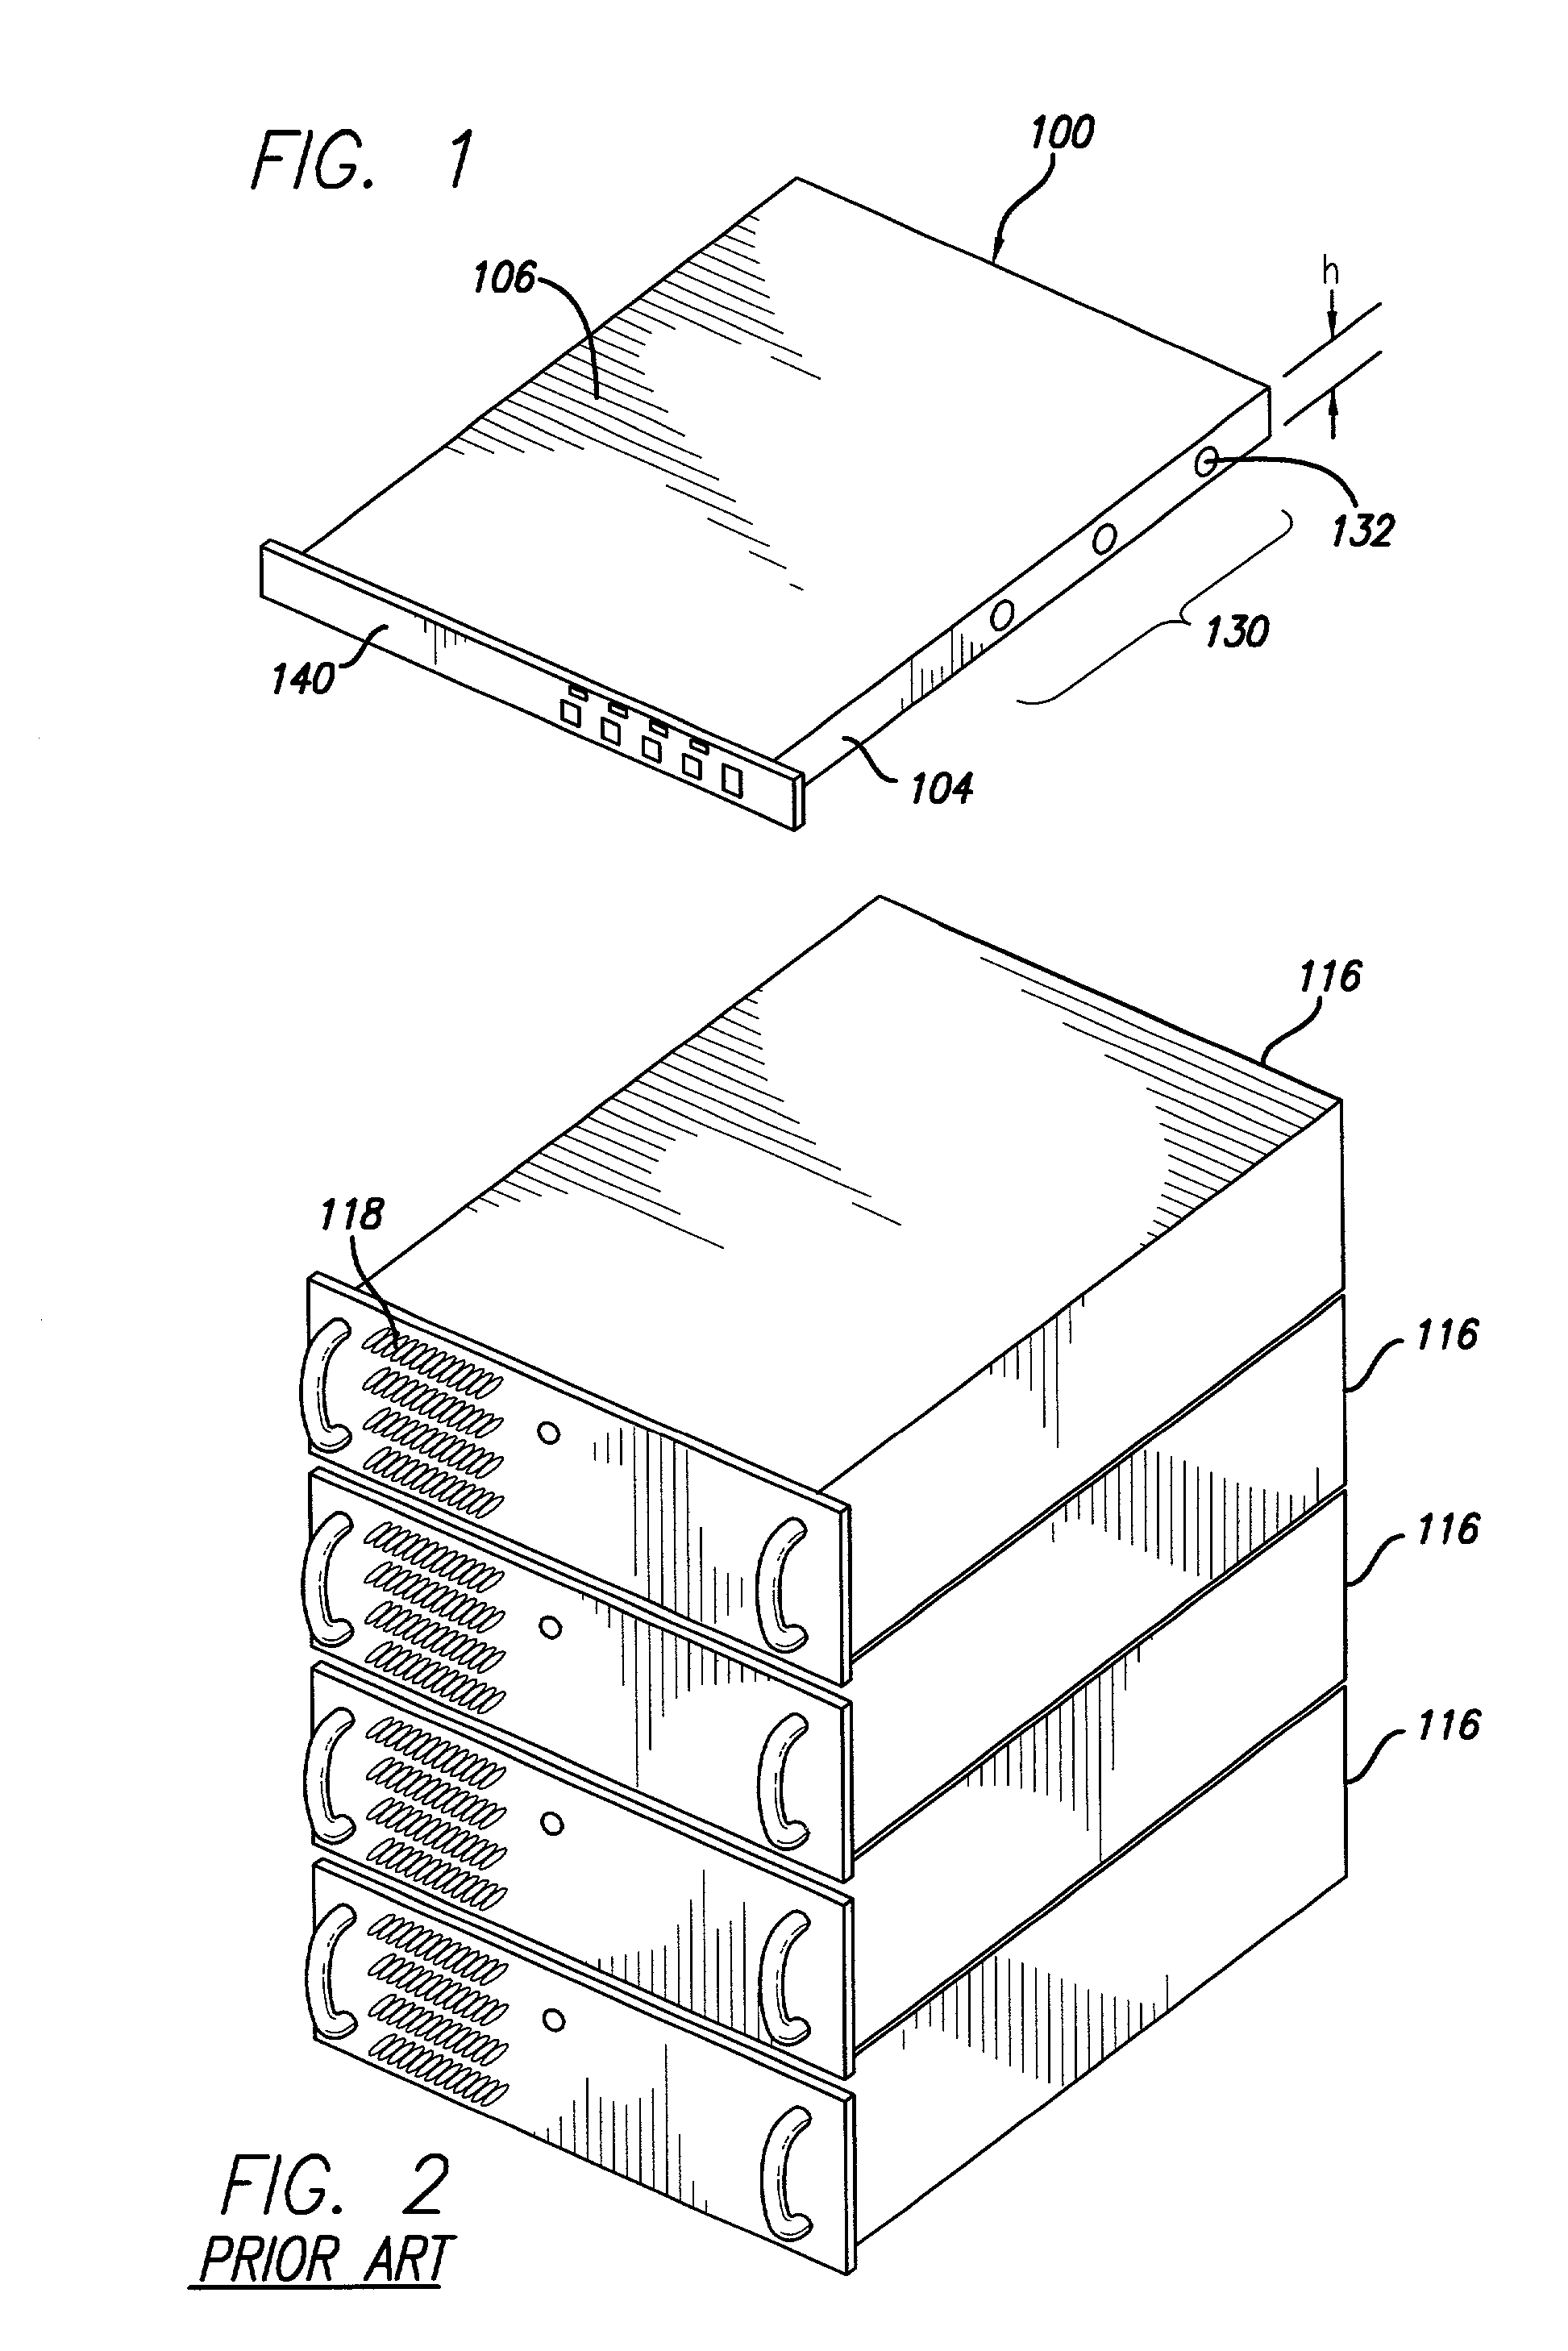 Cooling system and method for a high density electronics enclosure